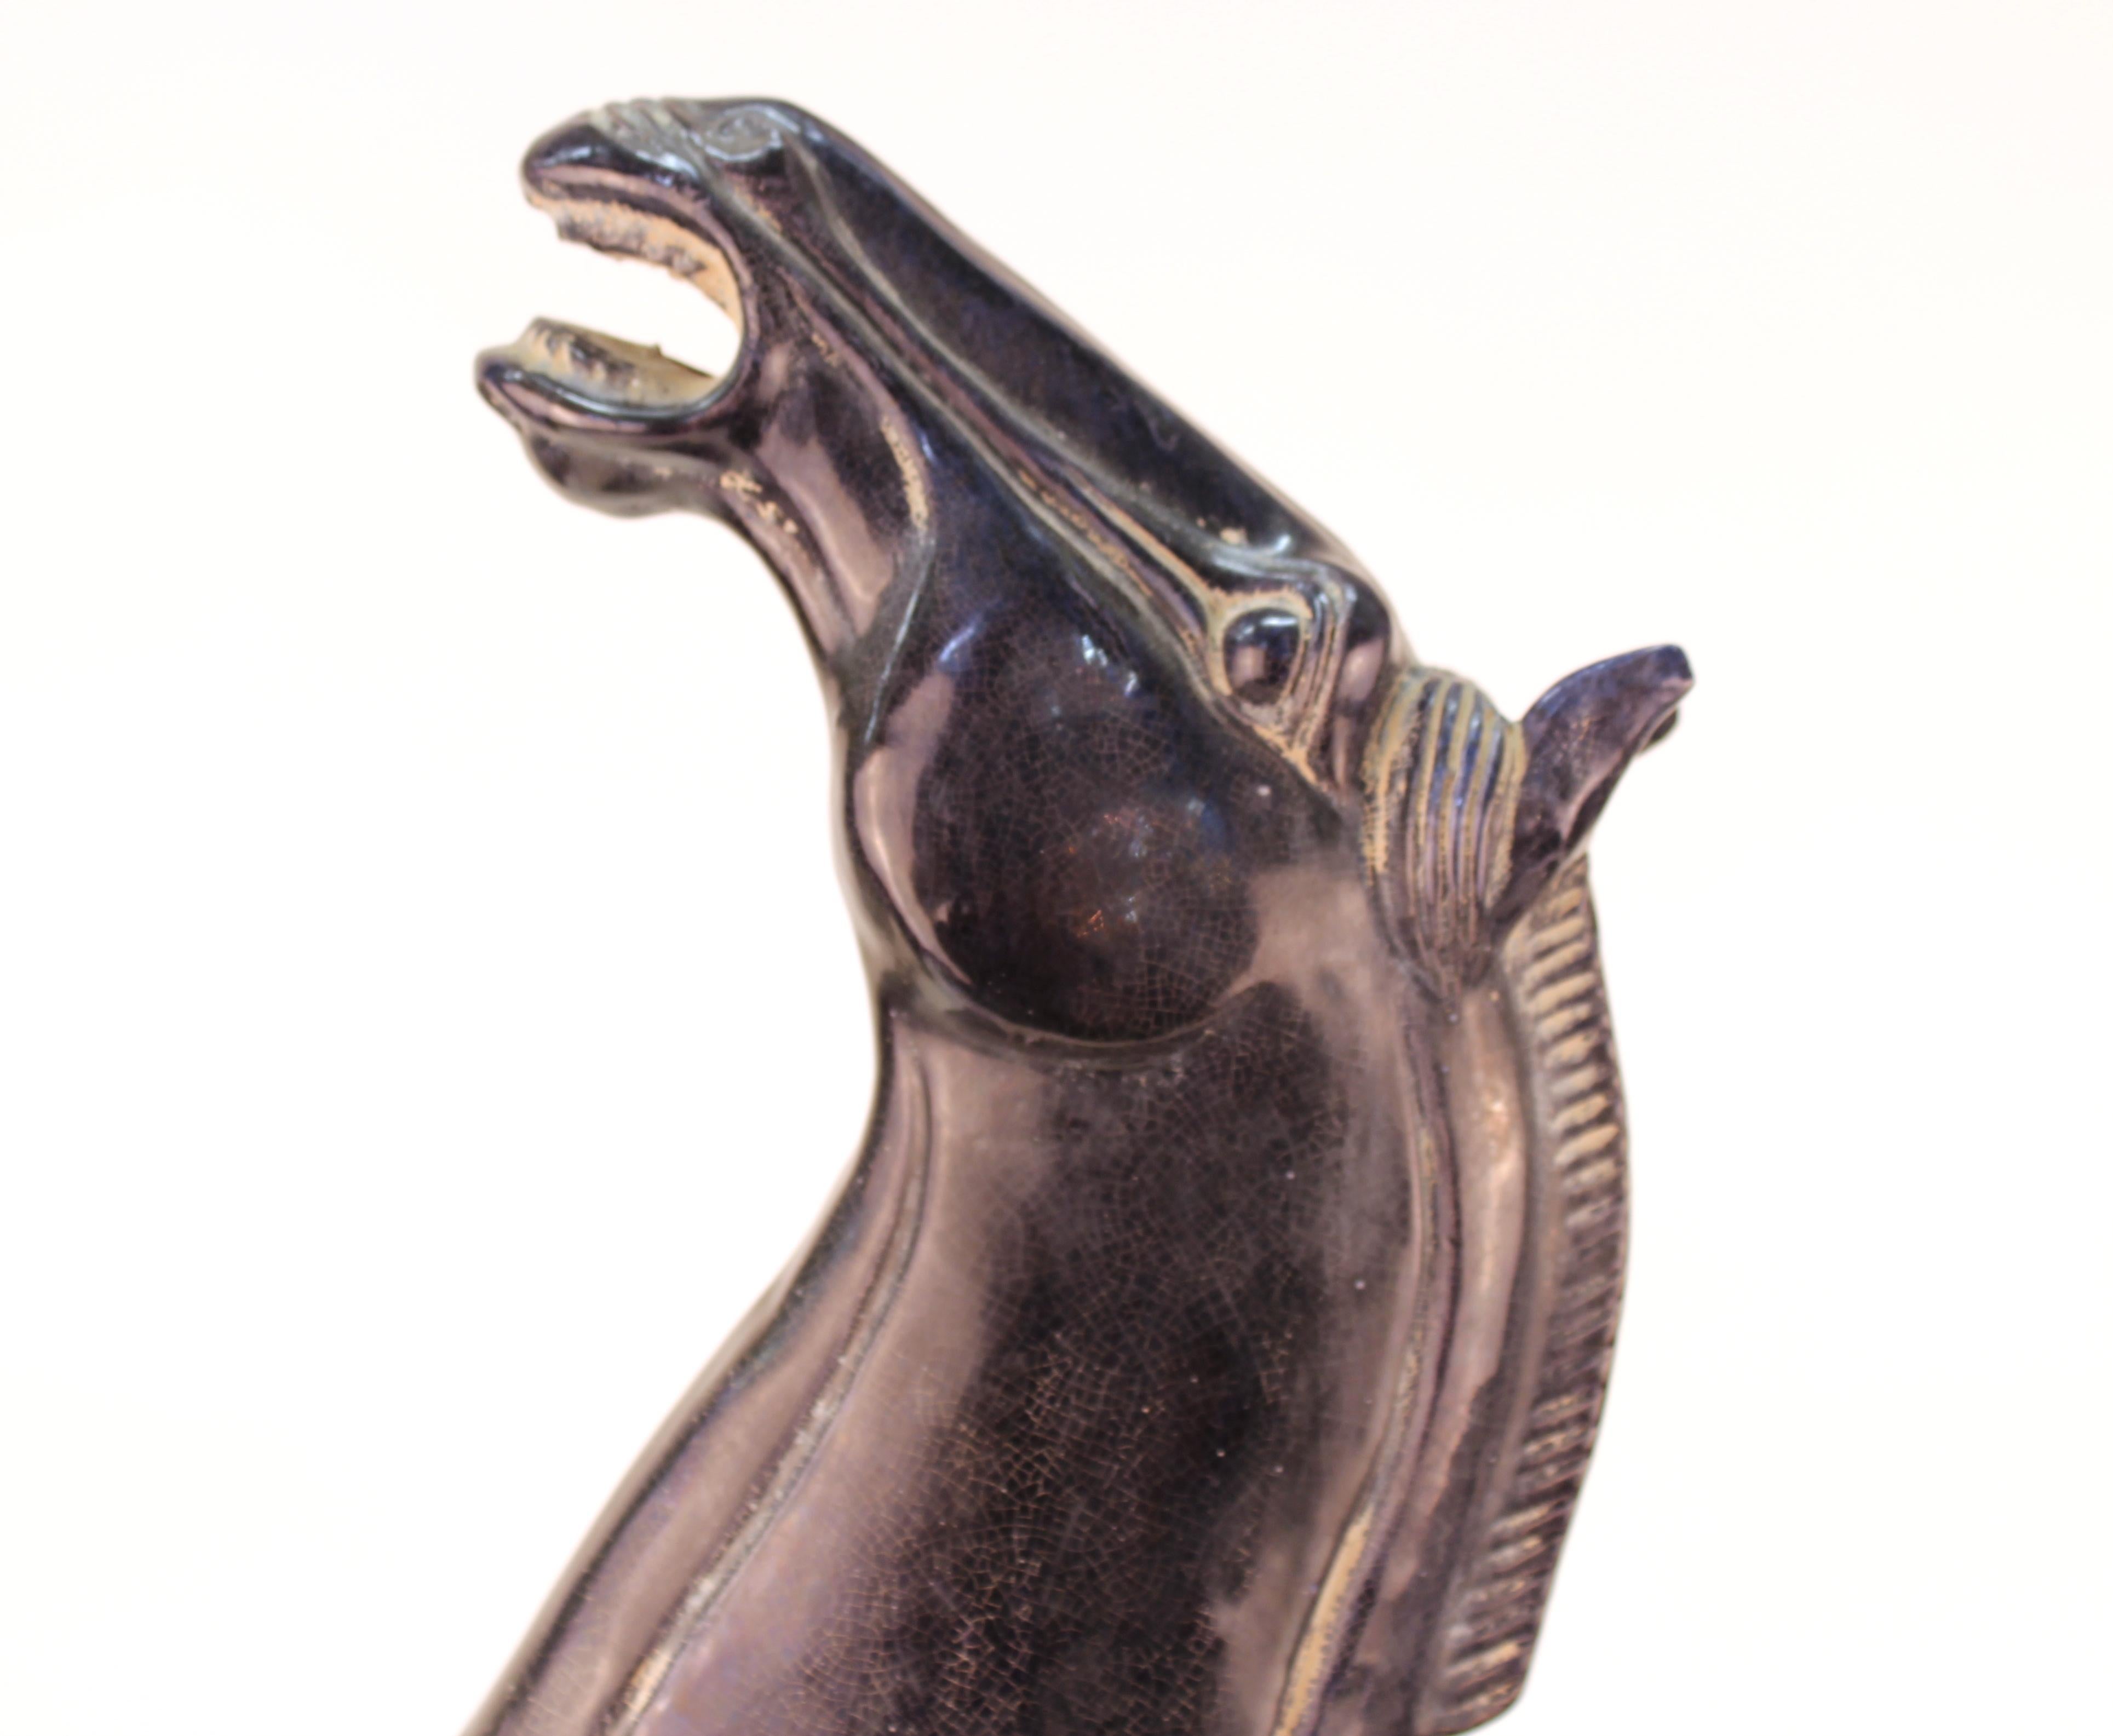 Late 20th Century Chinese Tang Style Terracotta Horse Sculpture in Dark Blue Glaze and Drippings